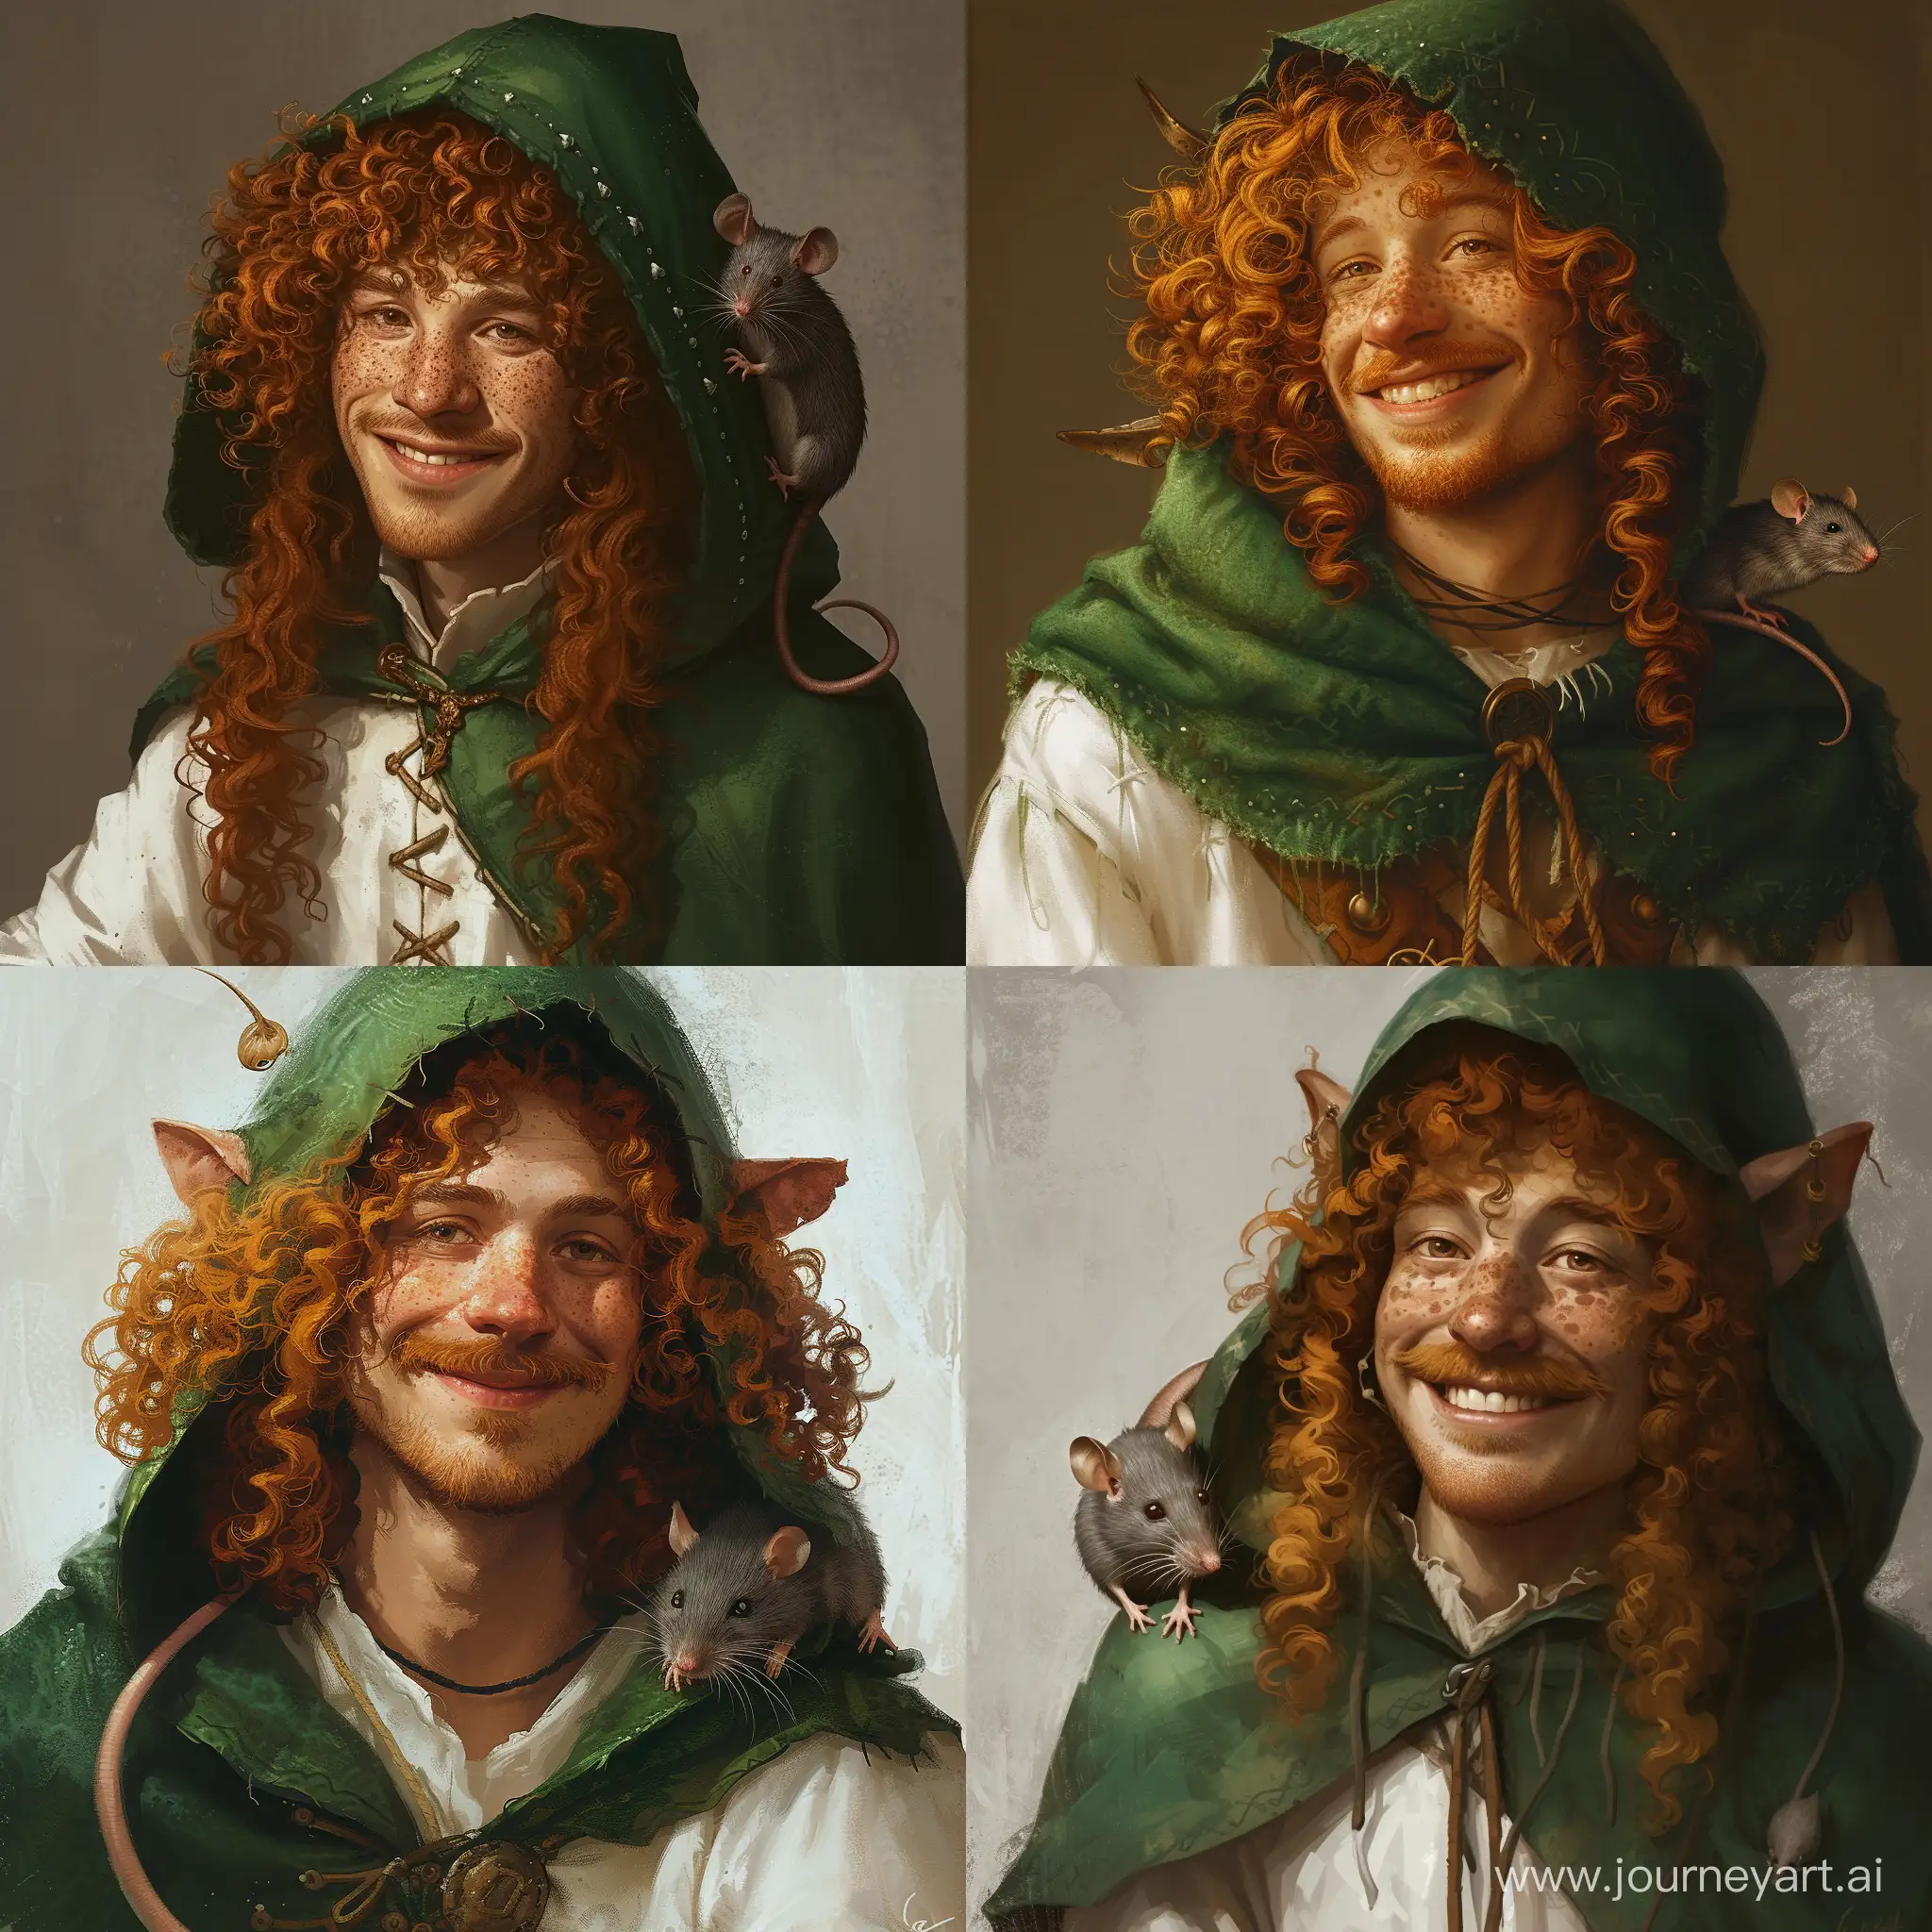 Cheerful-Elf-Druid-with-Rat-Companion-in-Green-Hooded-Cloak